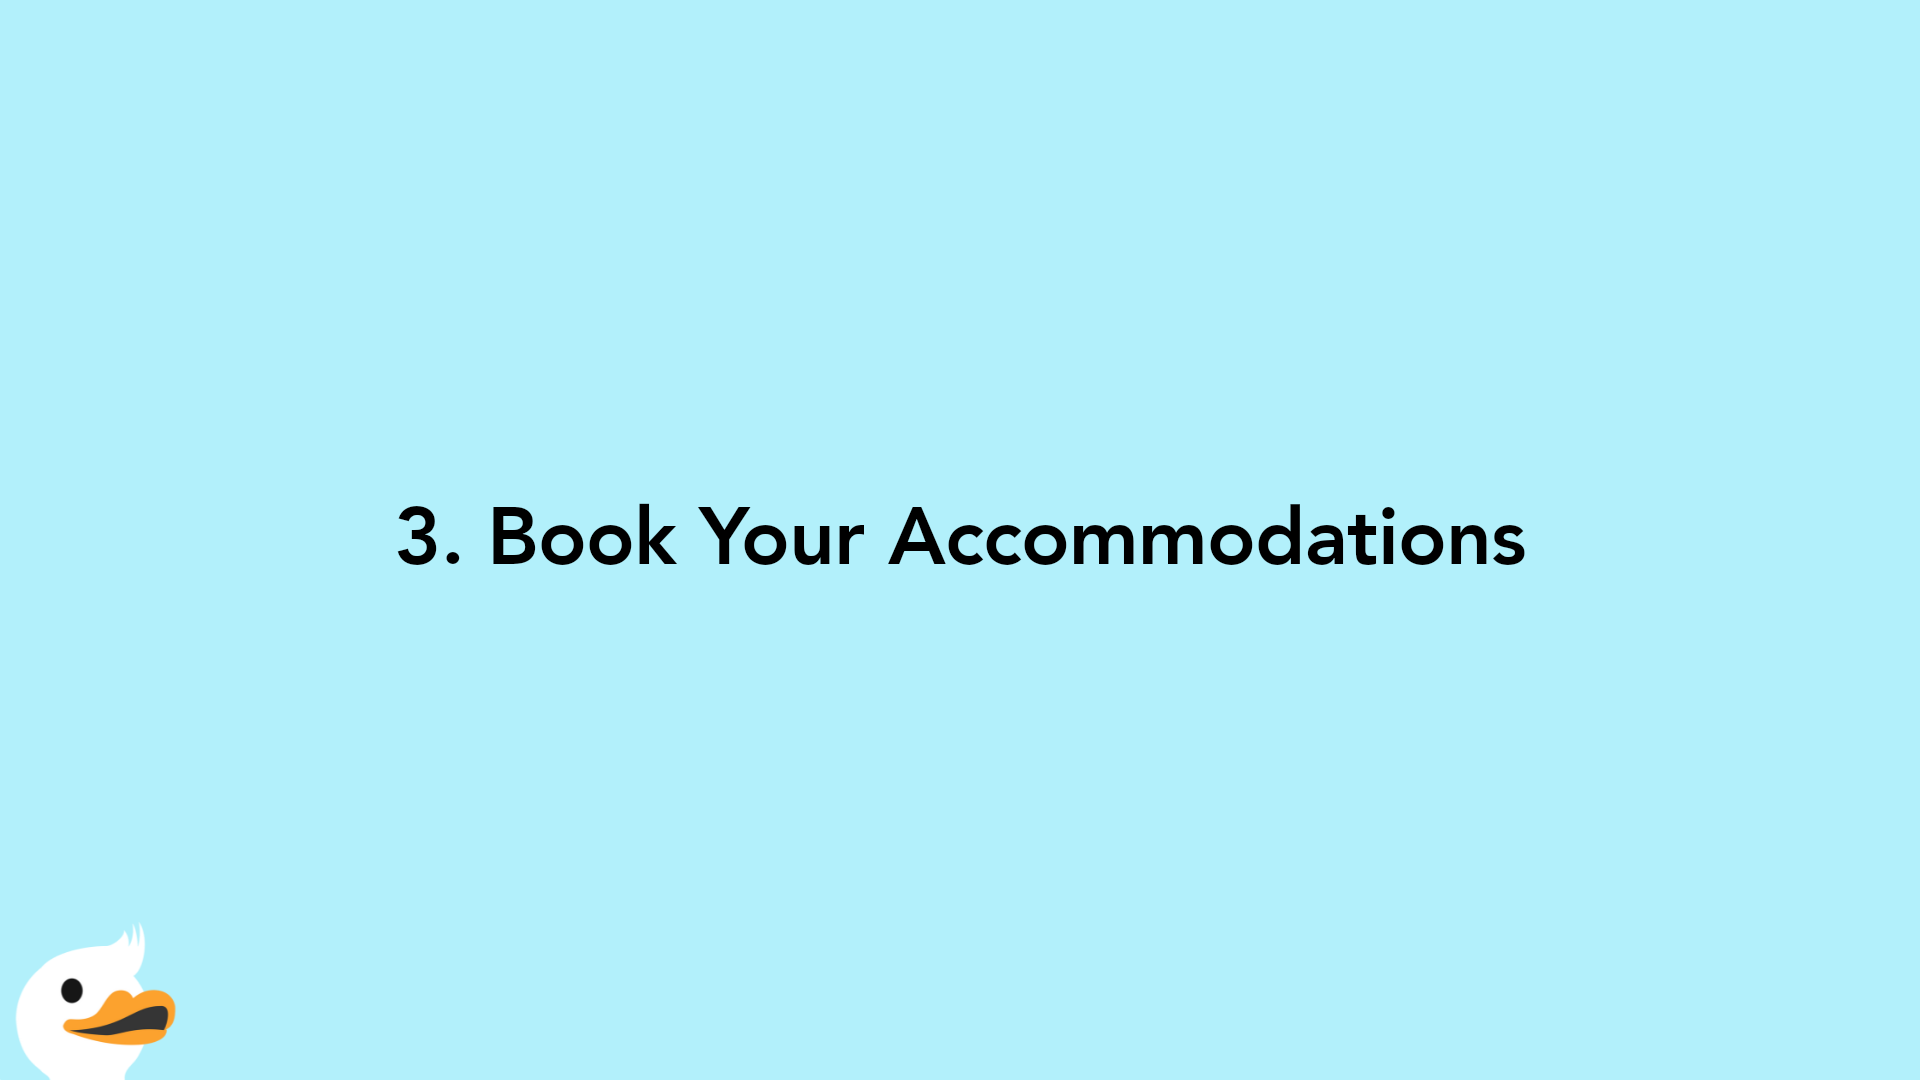 3. Book Your Accommodations